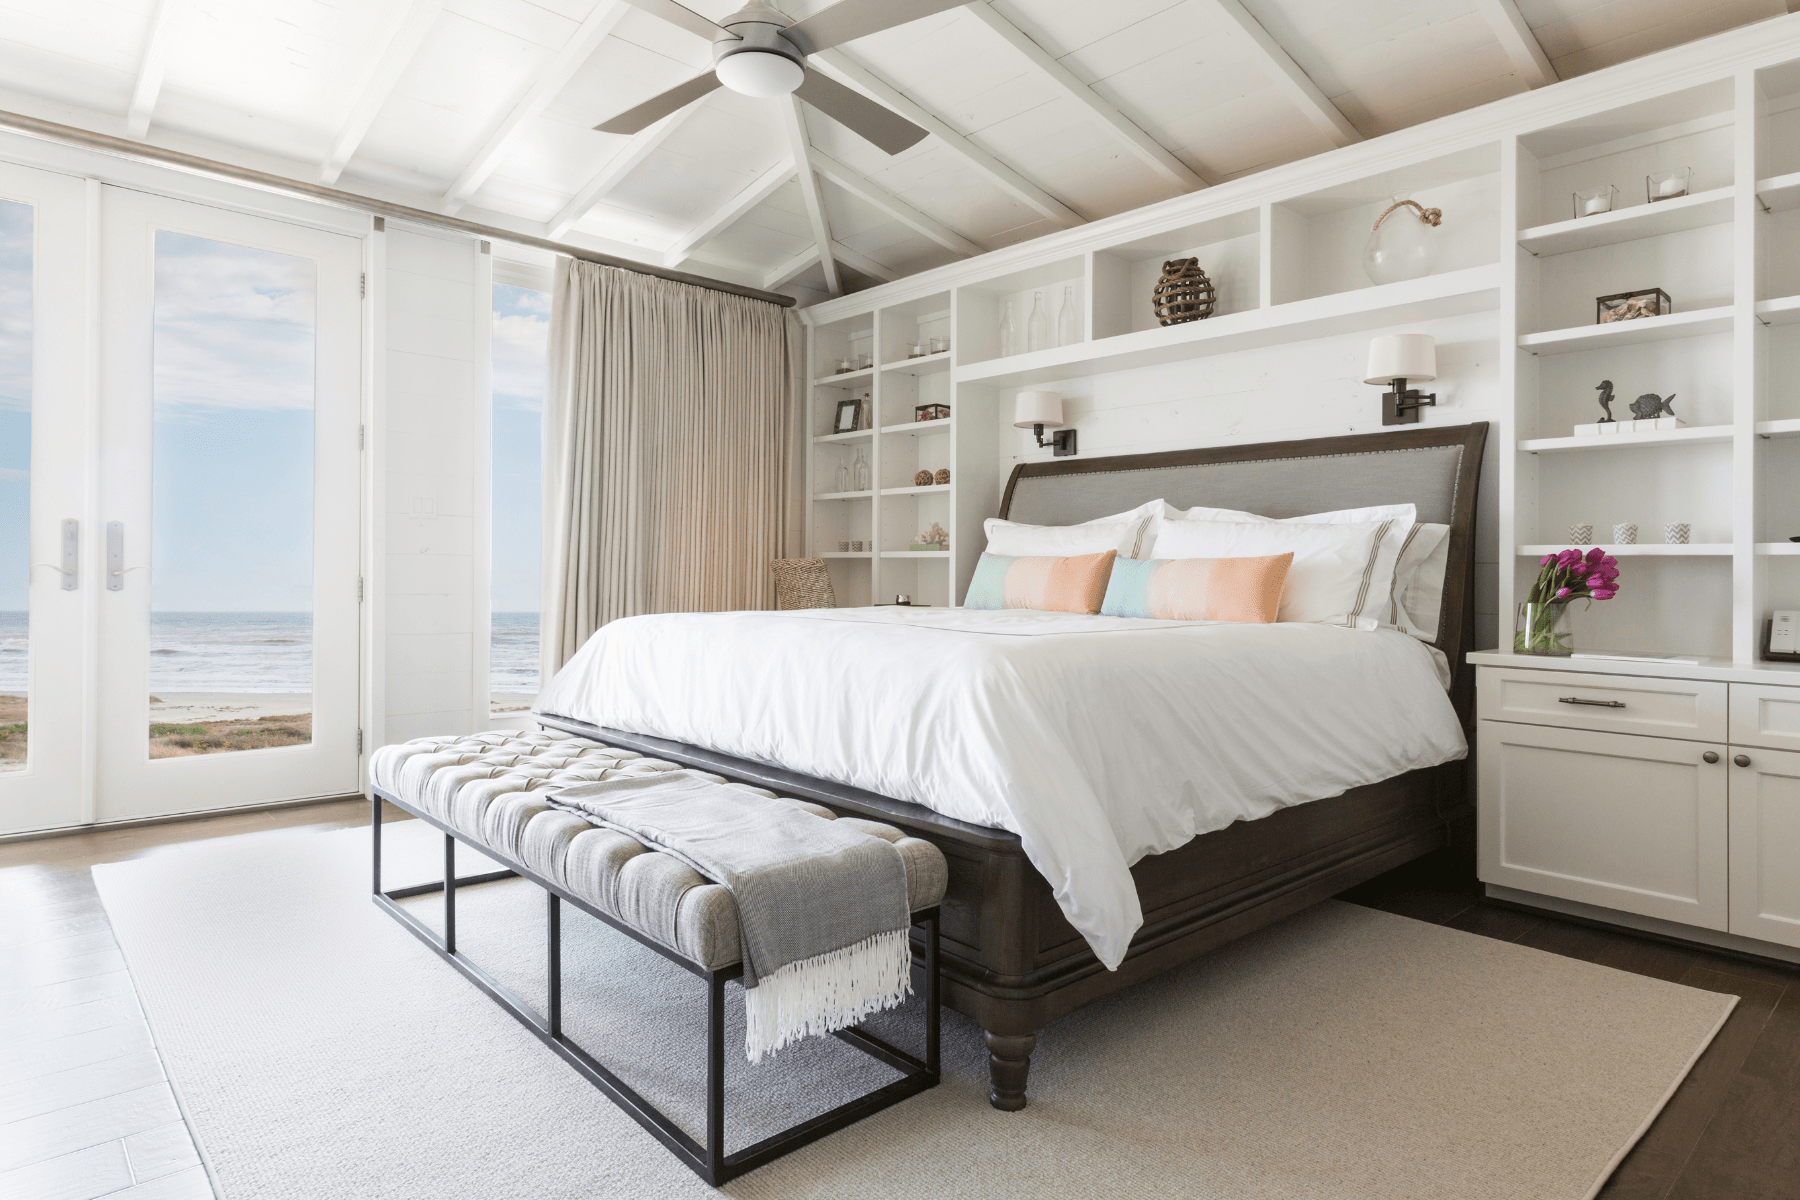 A view of the Sandhill Shores master bedroom with custom white built-in shelving and a soft palette for a coastal feel.